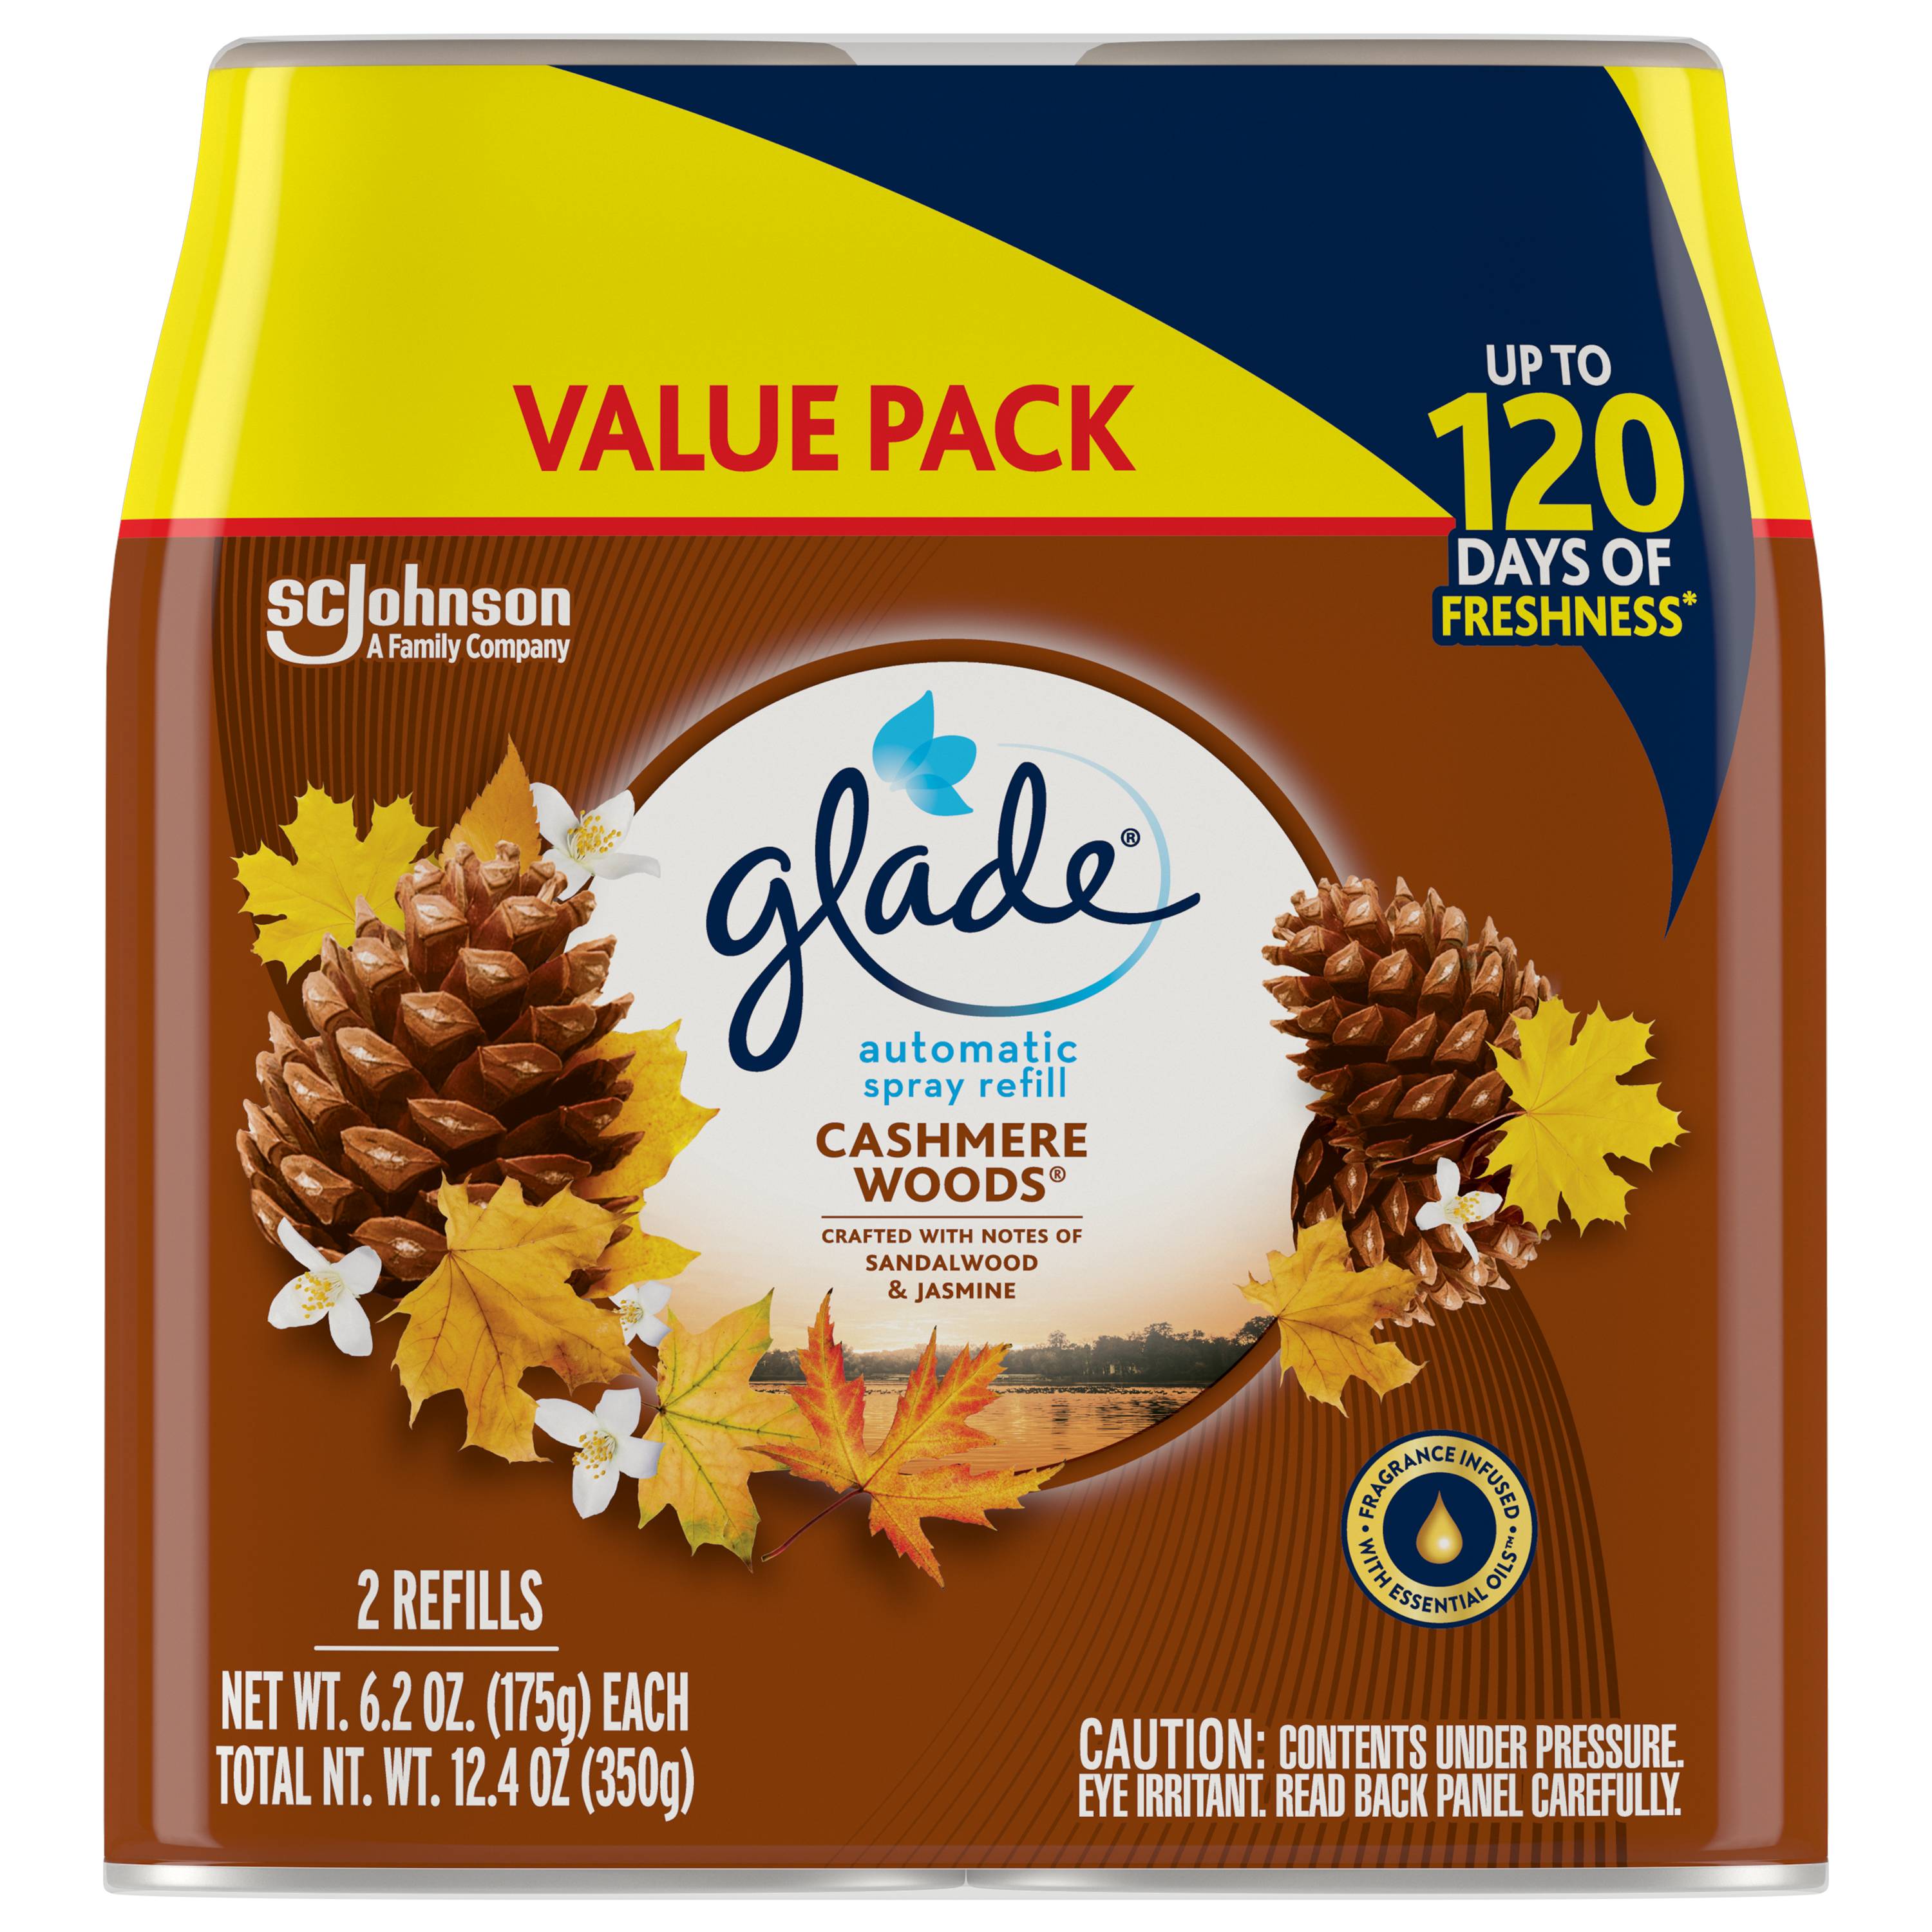 Glade Automatic Spray Refill, Cashmere Woods, Value Pack - 2 pack, 6.2 oz refills